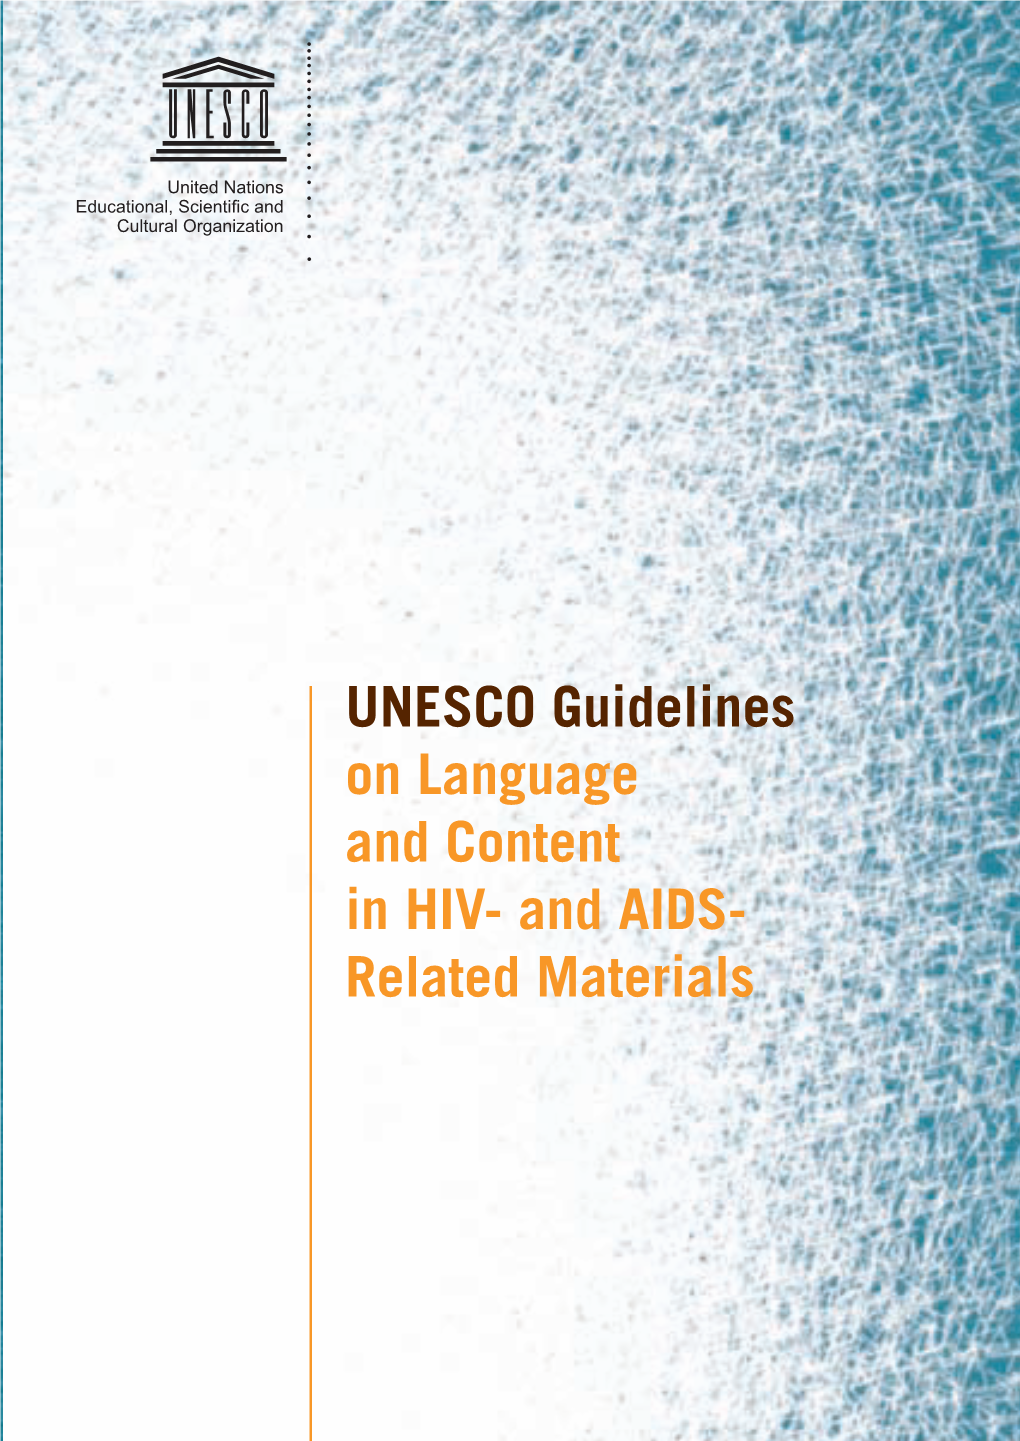 UNESCO Guidelines on Language and Content in HIV and AIDS